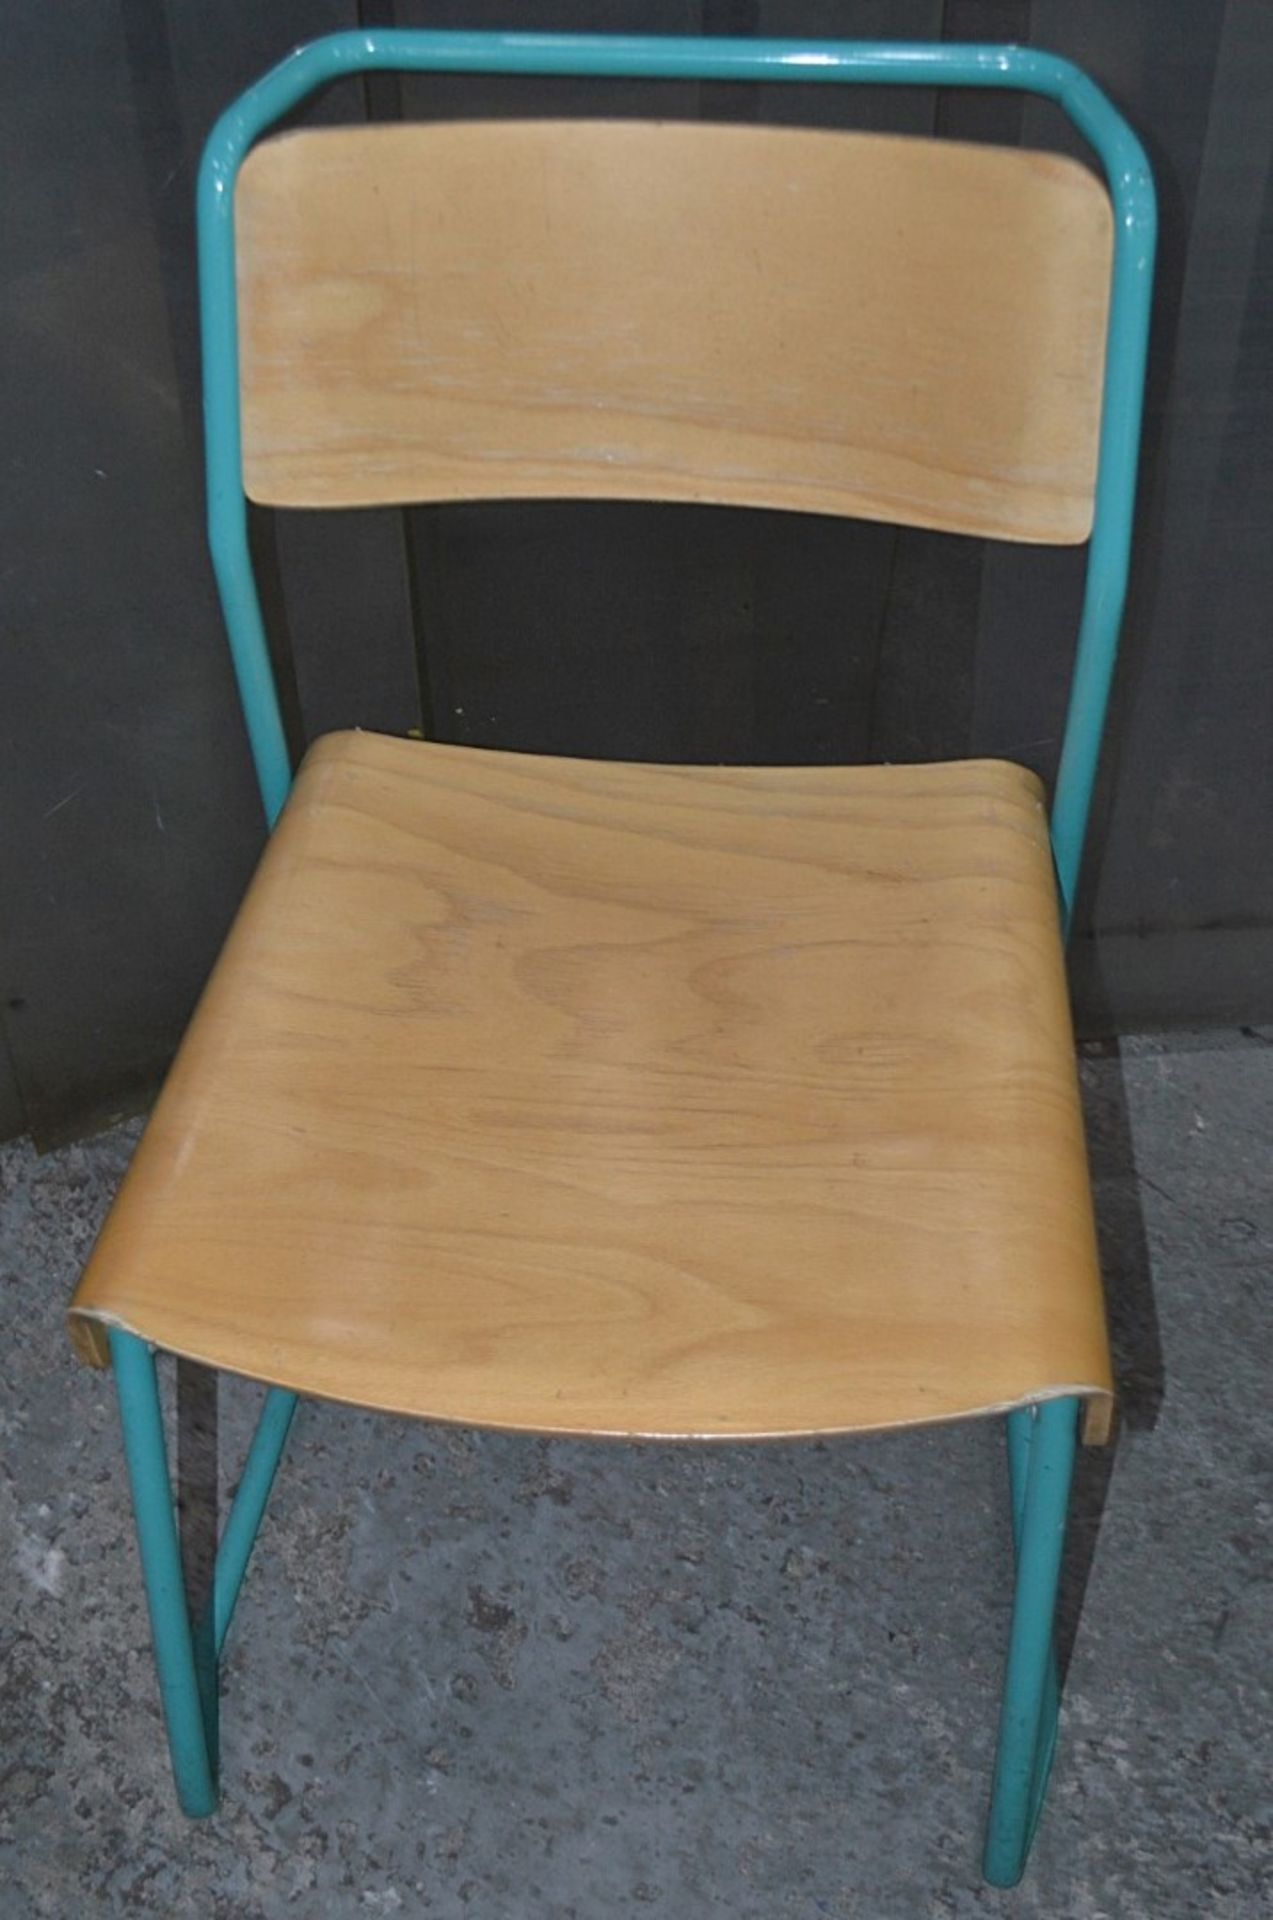 12 x Contemporary Stackable Bistro / Bar Chairs With Metal Frames In Teal With Curved Vanished - Image 6 of 11